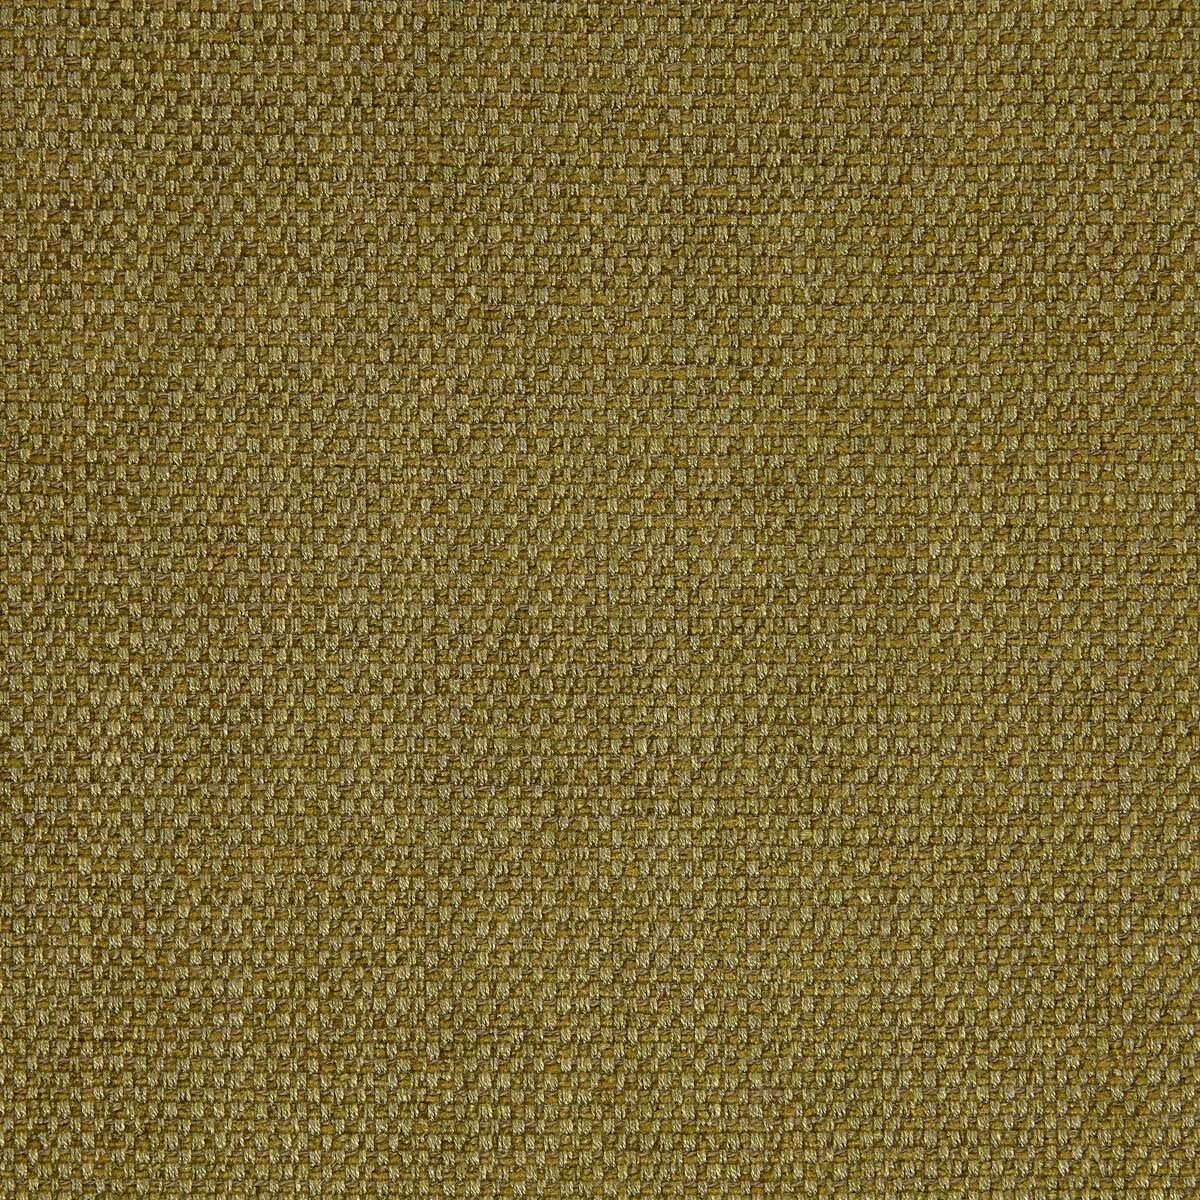 Godai fabric in 23 color - pattern LZ-30349.23.0 - by Kravet Design in the Lizzo collection